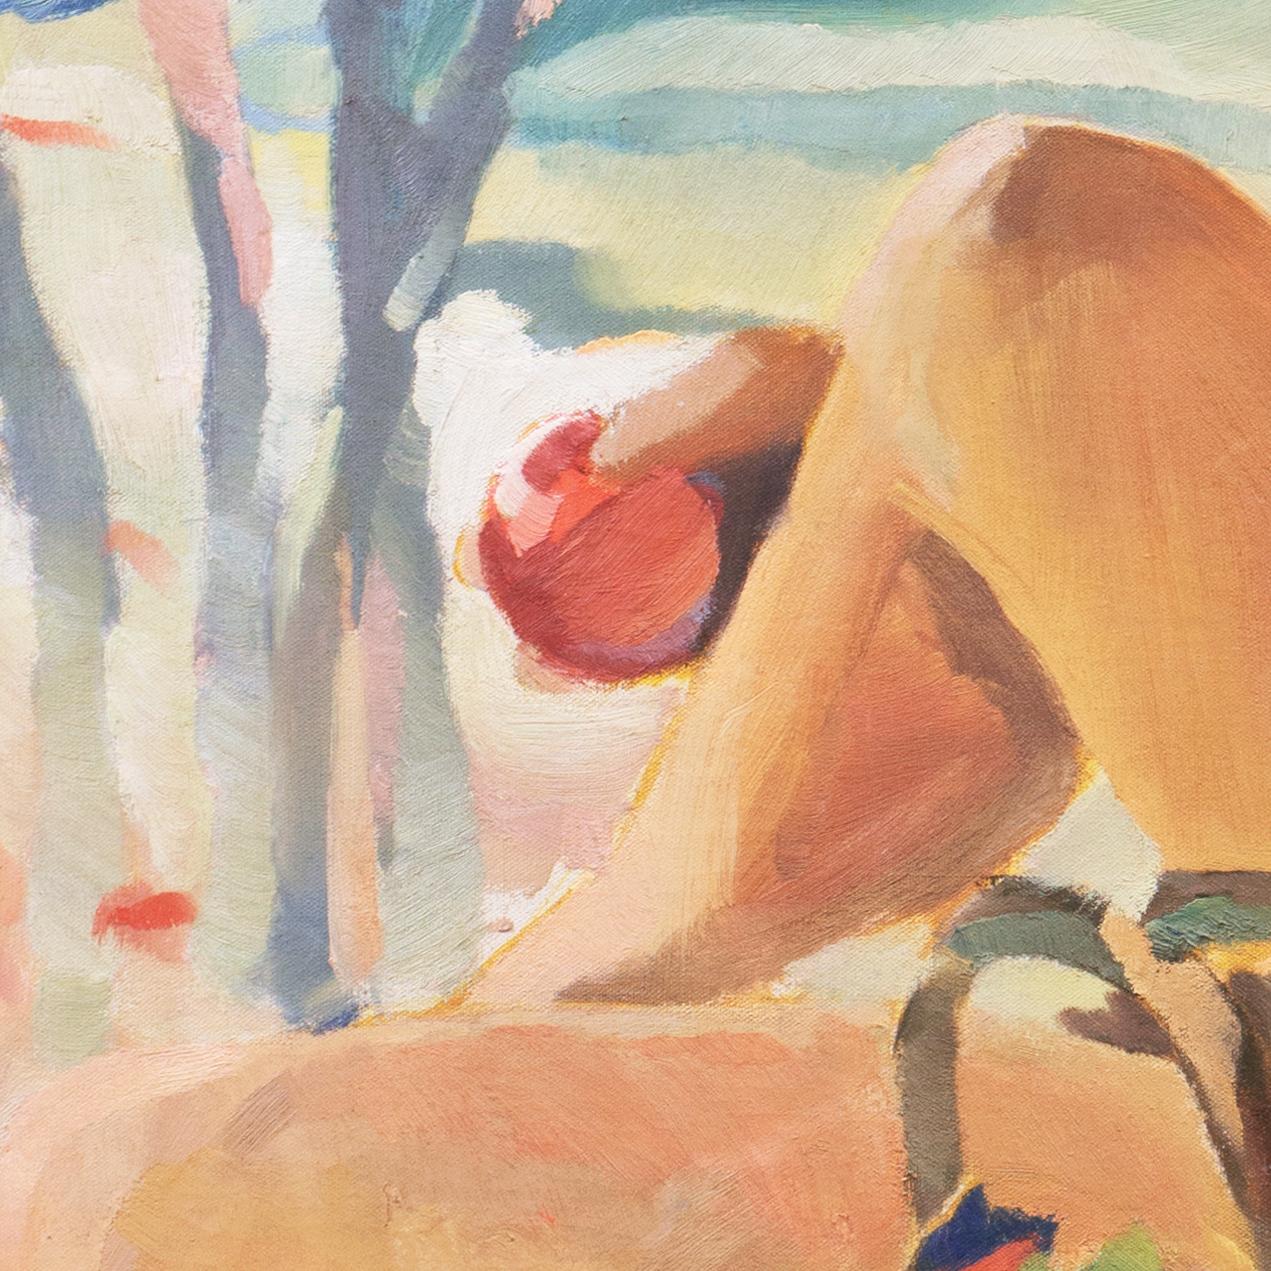 A large, Post-Impressionist figural oil of a young woman shown seated beside a river, partially clothed and holding an apple.

Signed lower left, 'Ellis' for Betty Corson Ellis (American, b. 1917) and painted circa 1936.

Betty Corson Ellis first